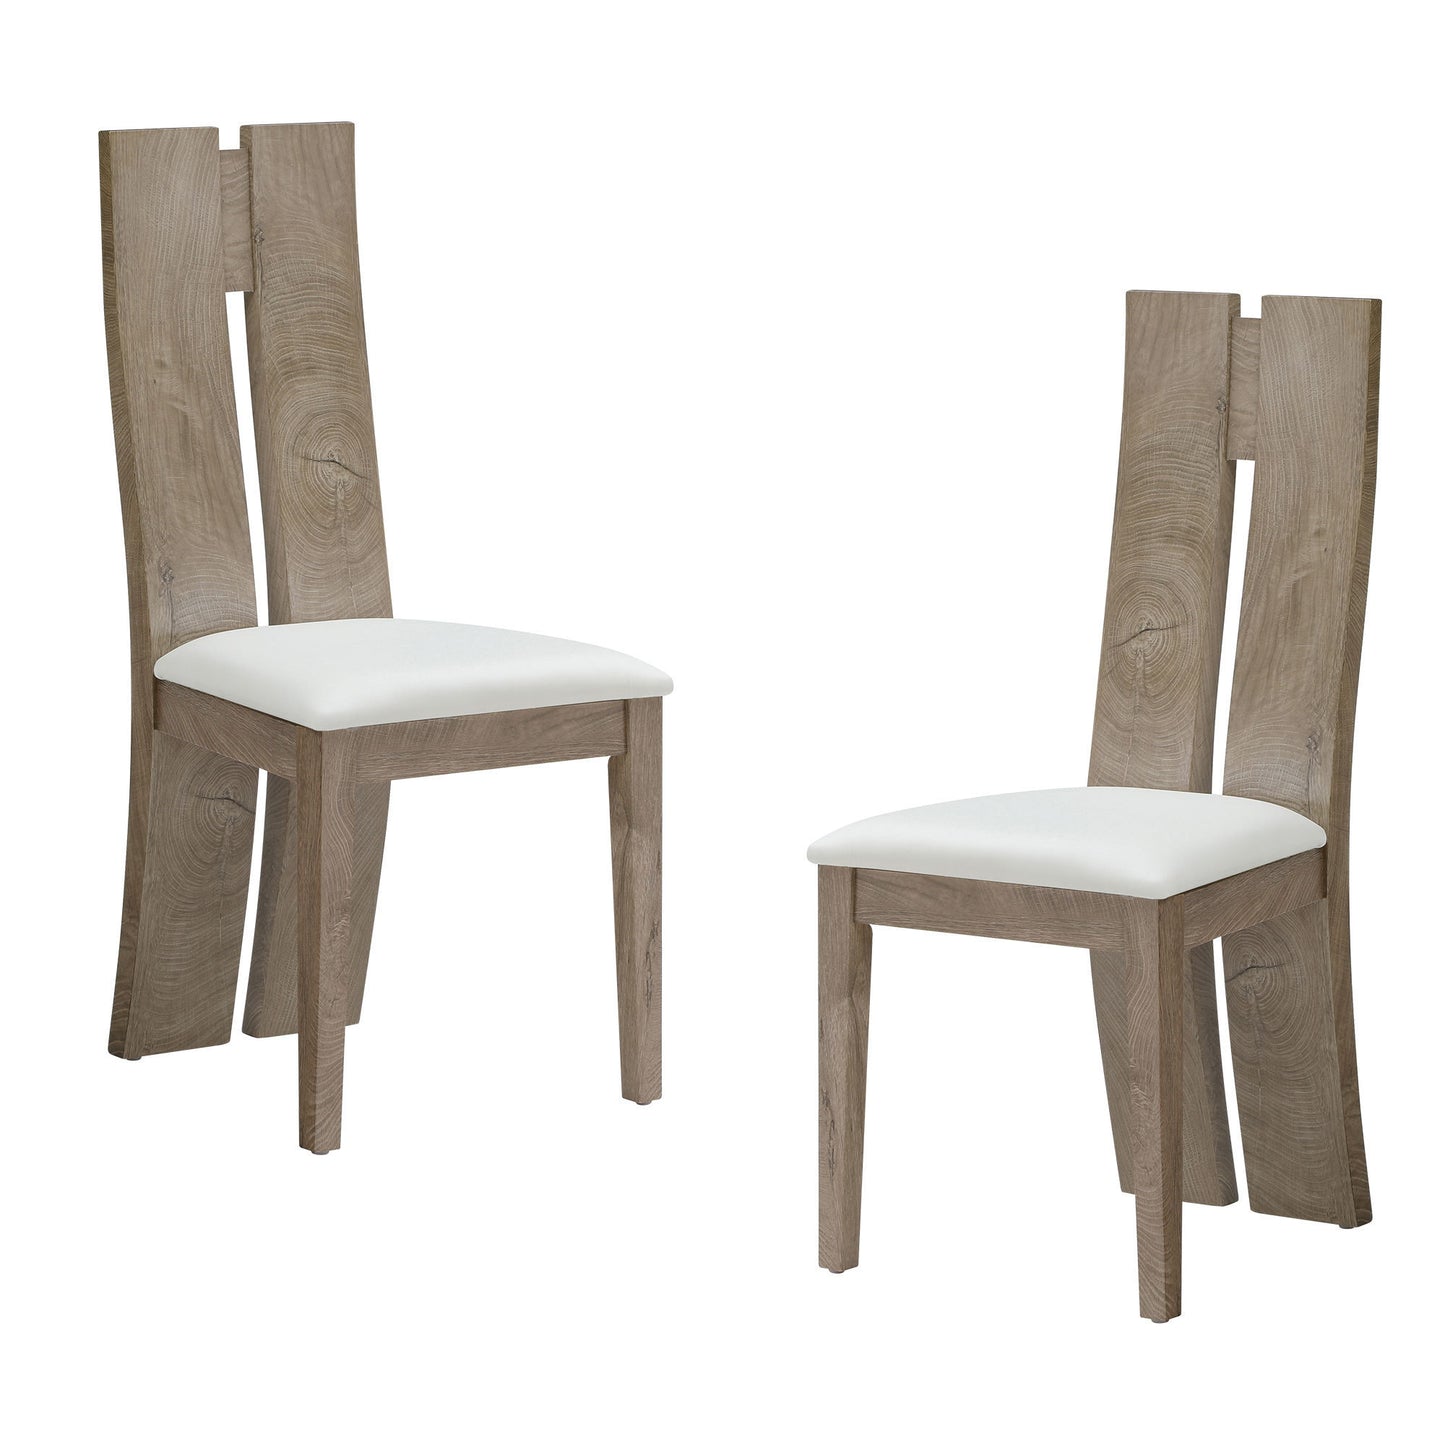 Dining Chair Set of 2 PU Leather Upholstered Cushion Seat Wooden High Back